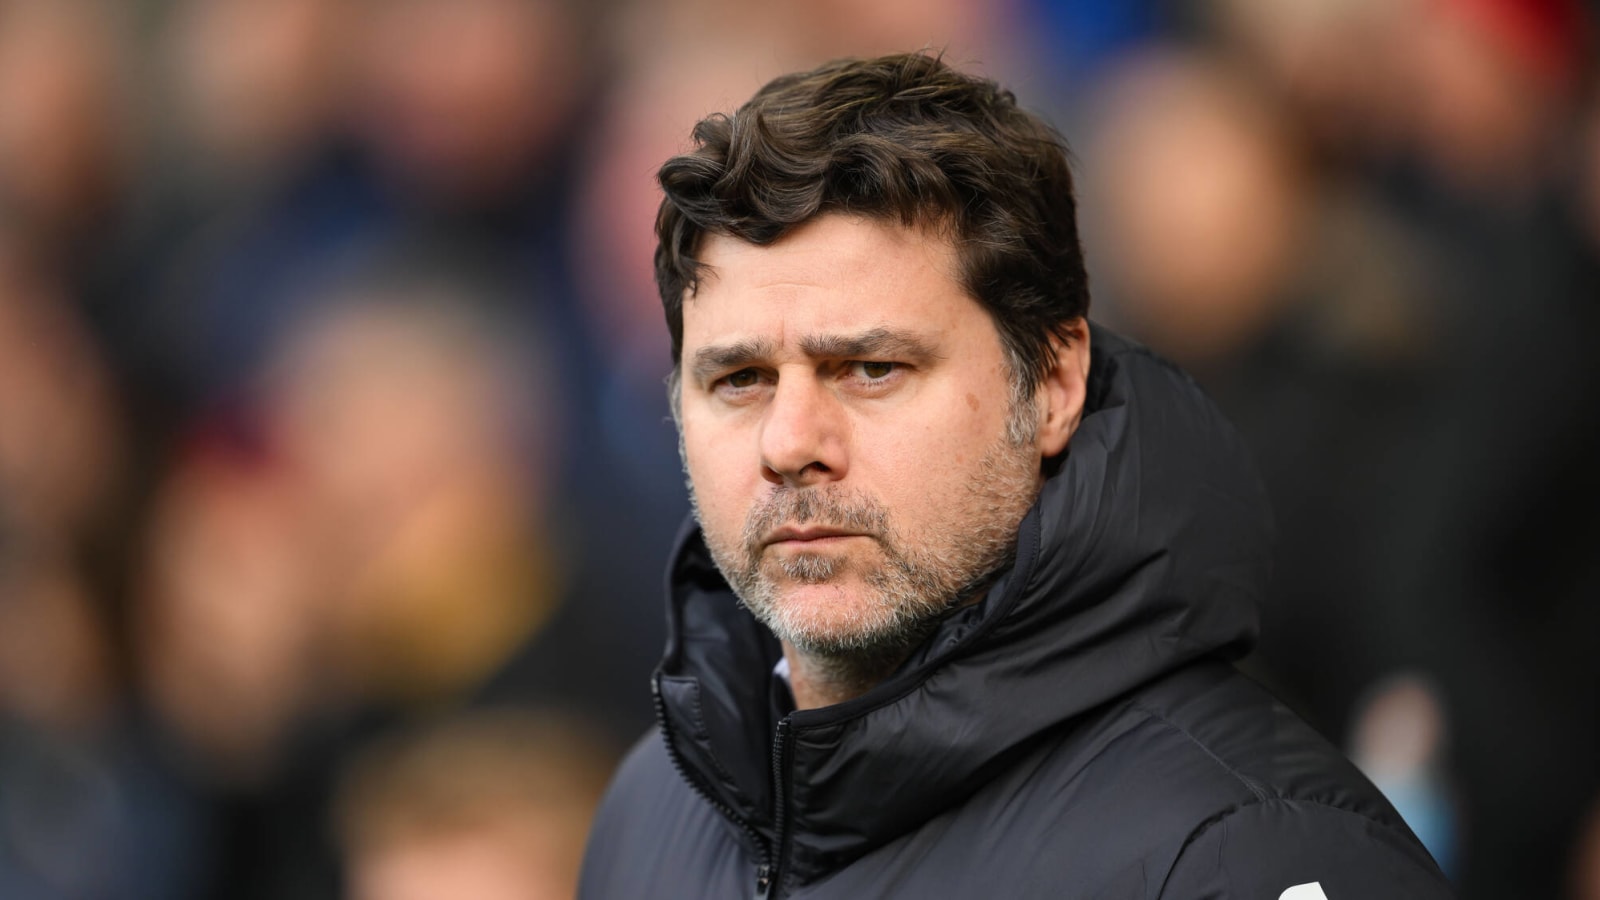 Report: Pochettino says he took a risk joining Chelsea and questions club strategy